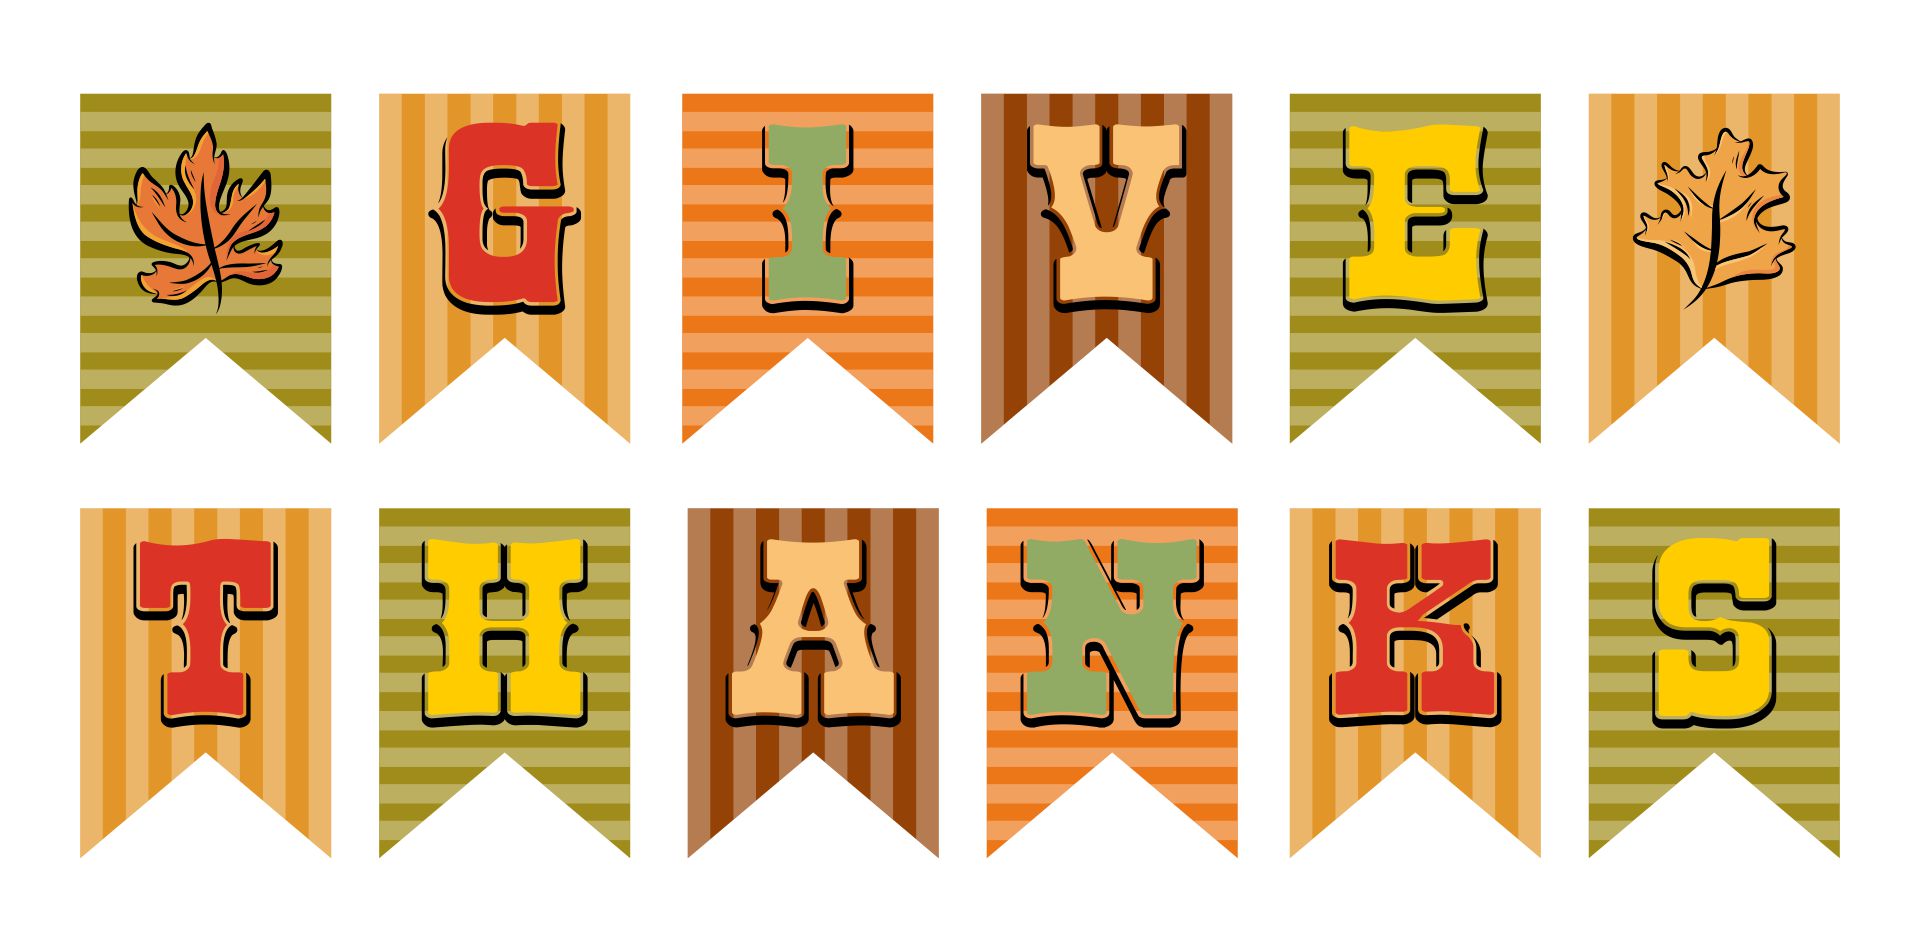 Thanksgiving Fall Banners Printables